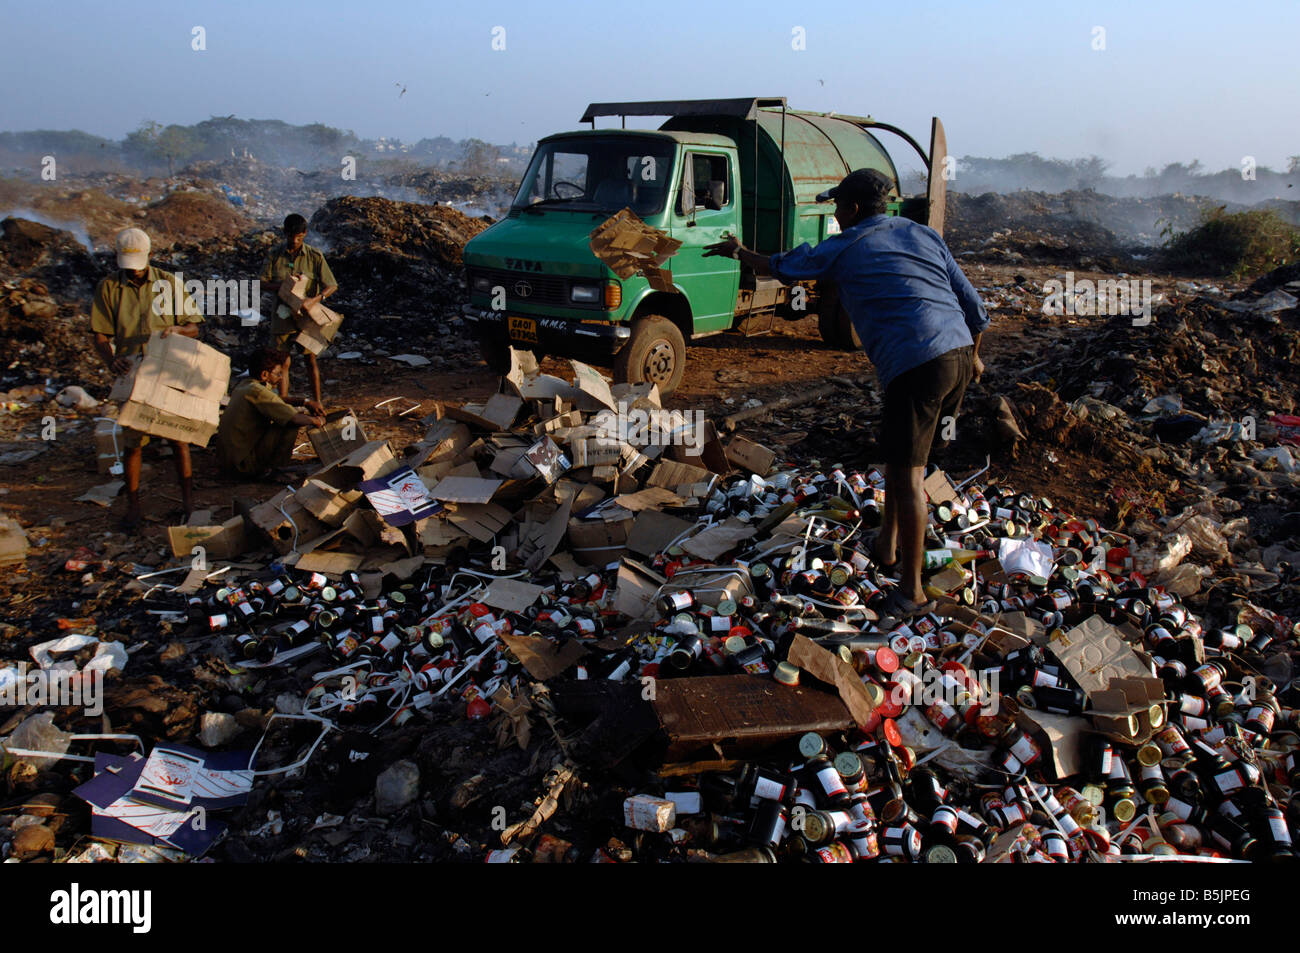 Rubbish dump near the town of Mapusa North Goa India. Local council refuse collectors sort through rubbish for items to sell. Stock Photo